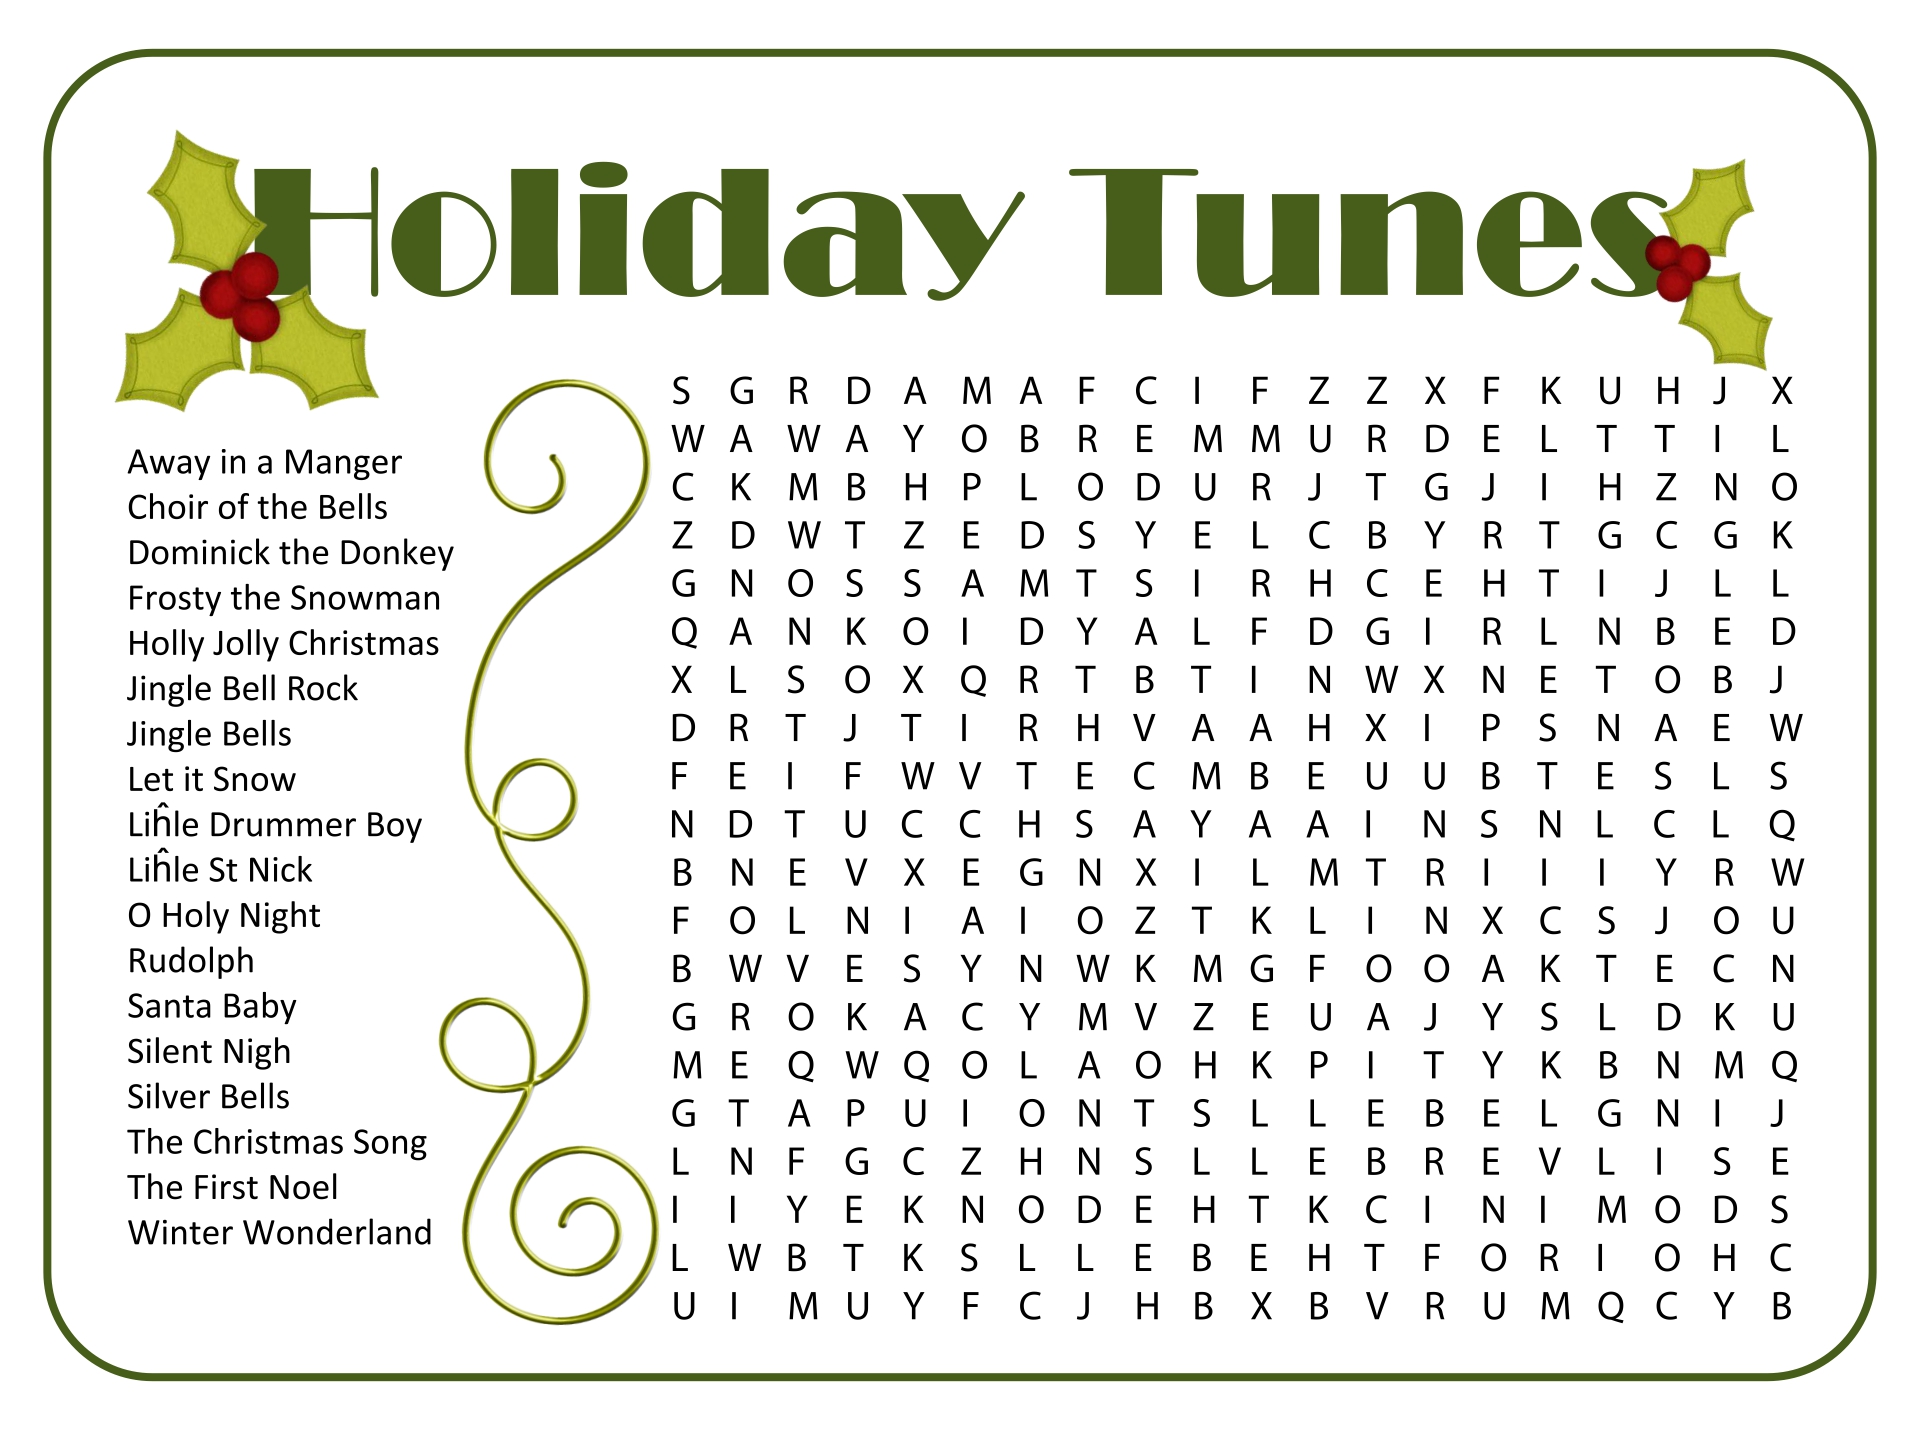 printable-christmas-word-search-puzzles